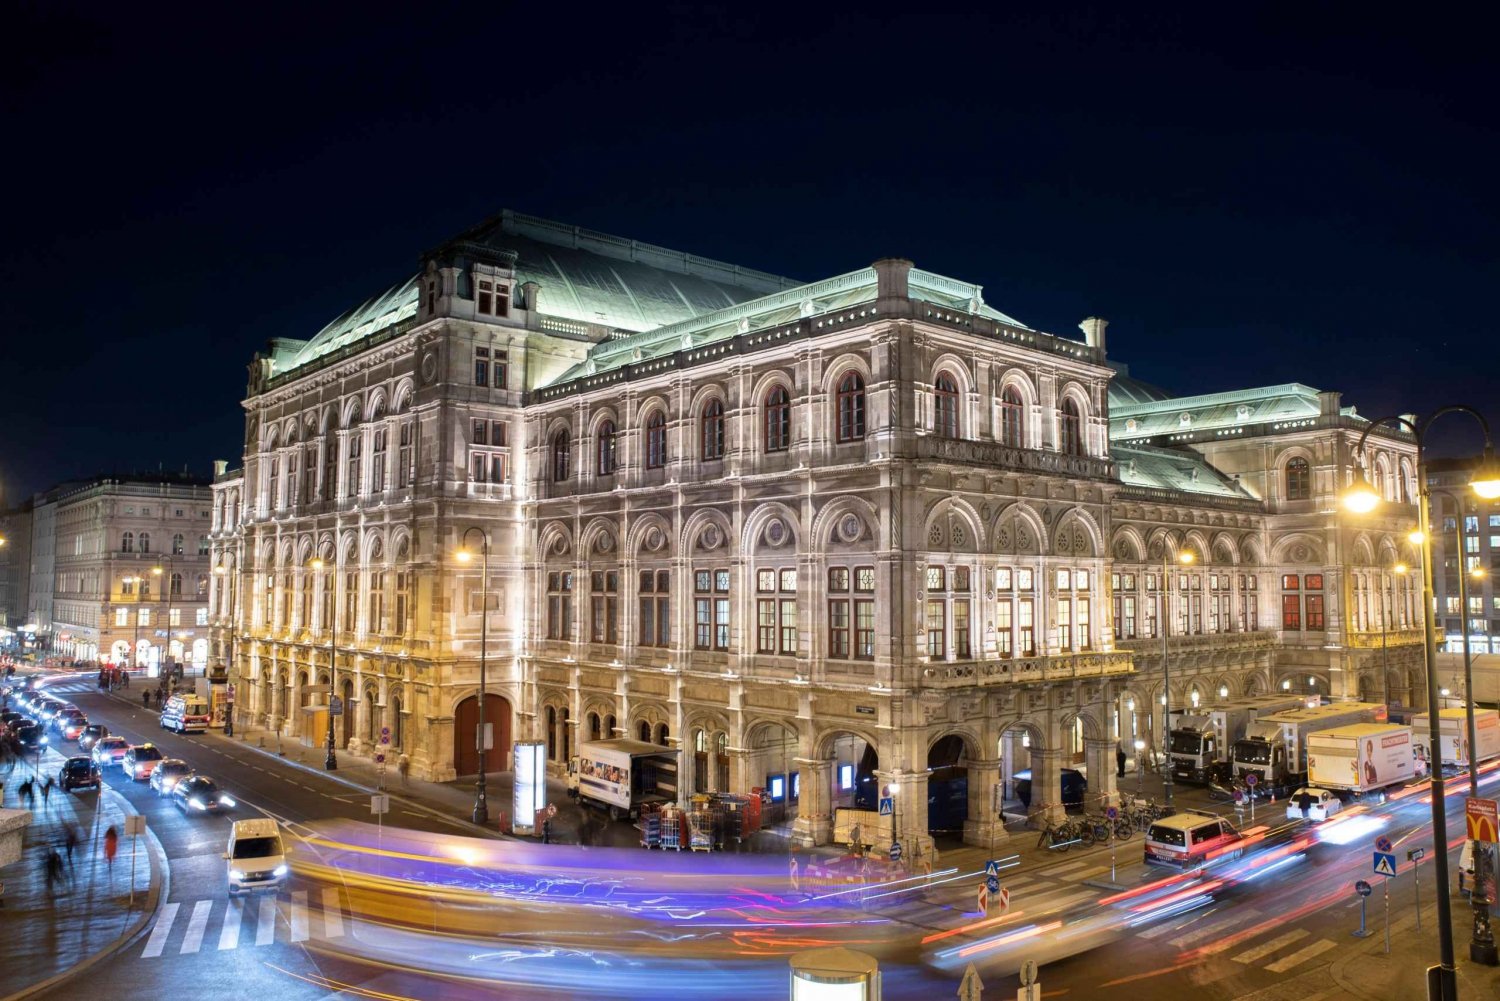 VIENNA AT NIGHT! Phototour of the most beautiful buildings